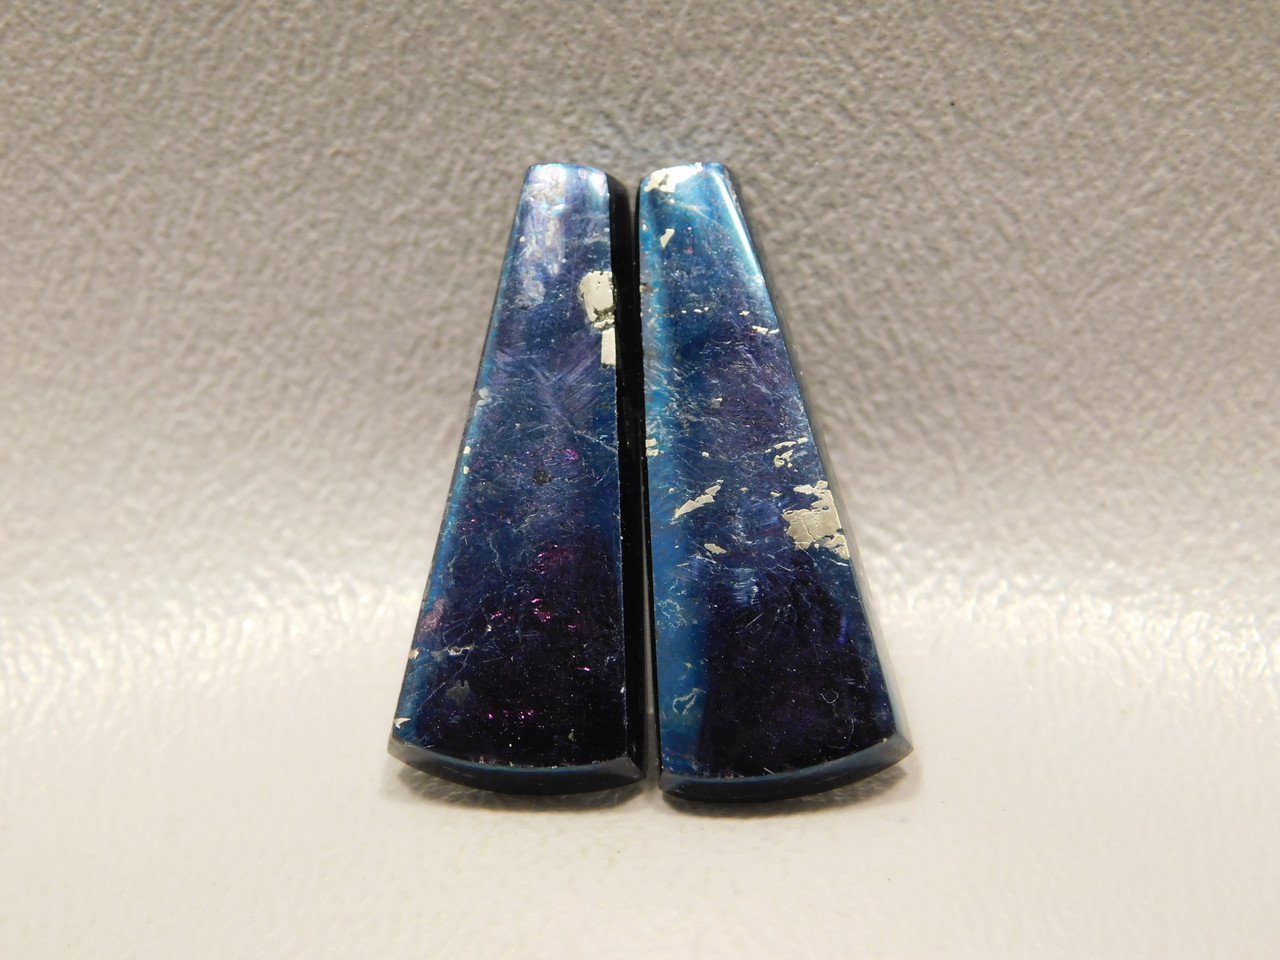 Covellite Matched Pair Cabochons #30